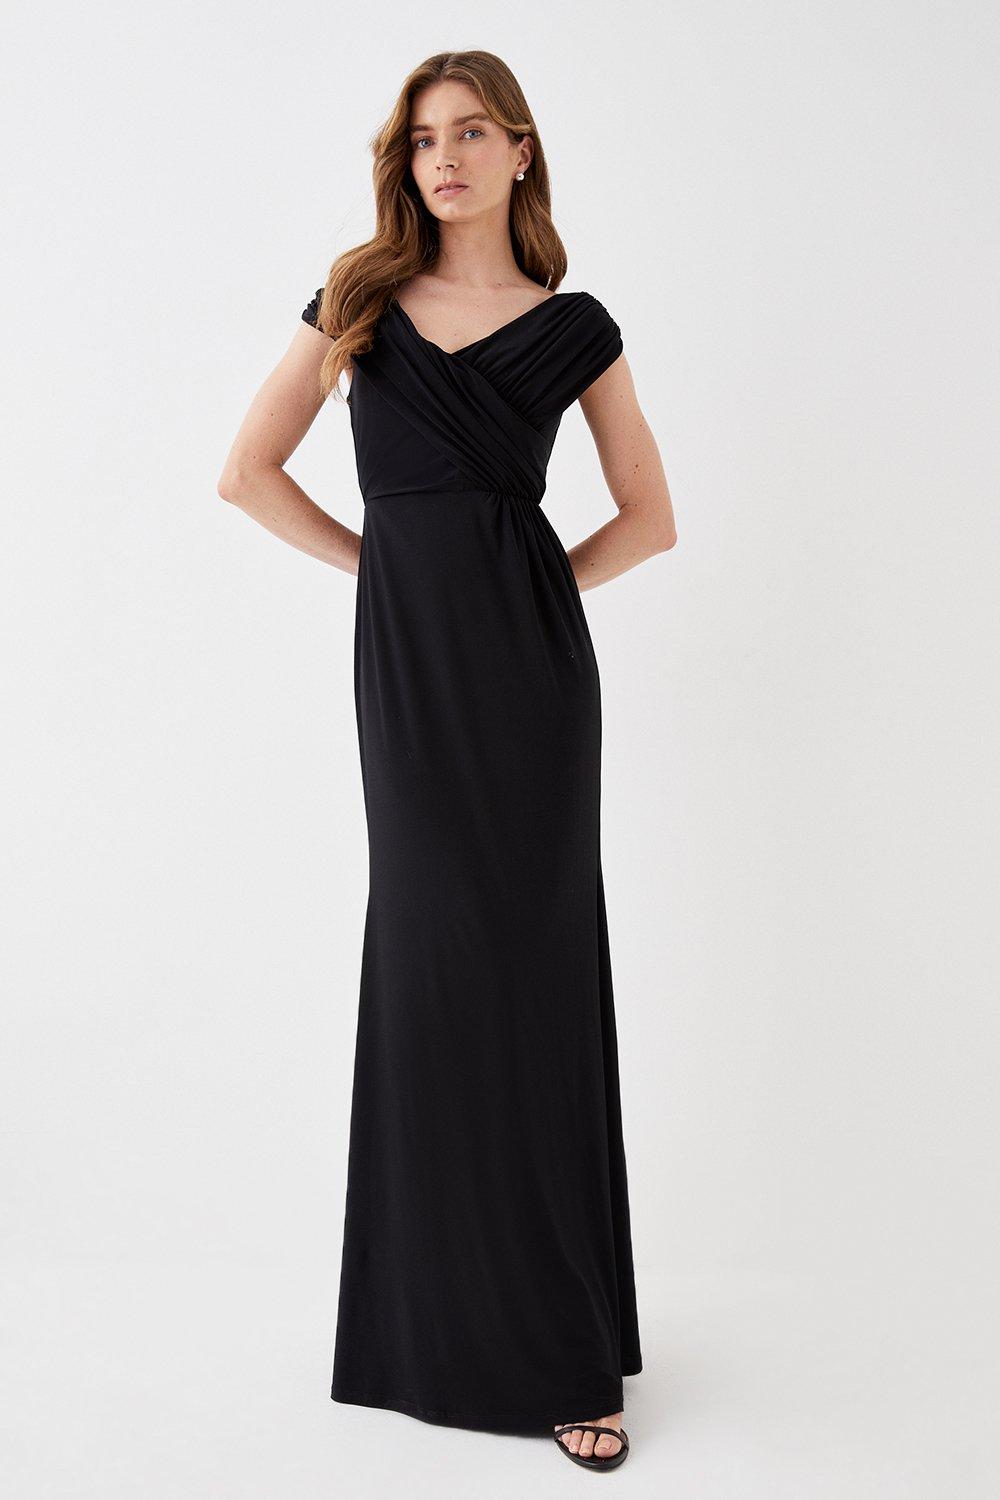 Ruched Bardot Fishtail Slinky Jersey Gown - Black